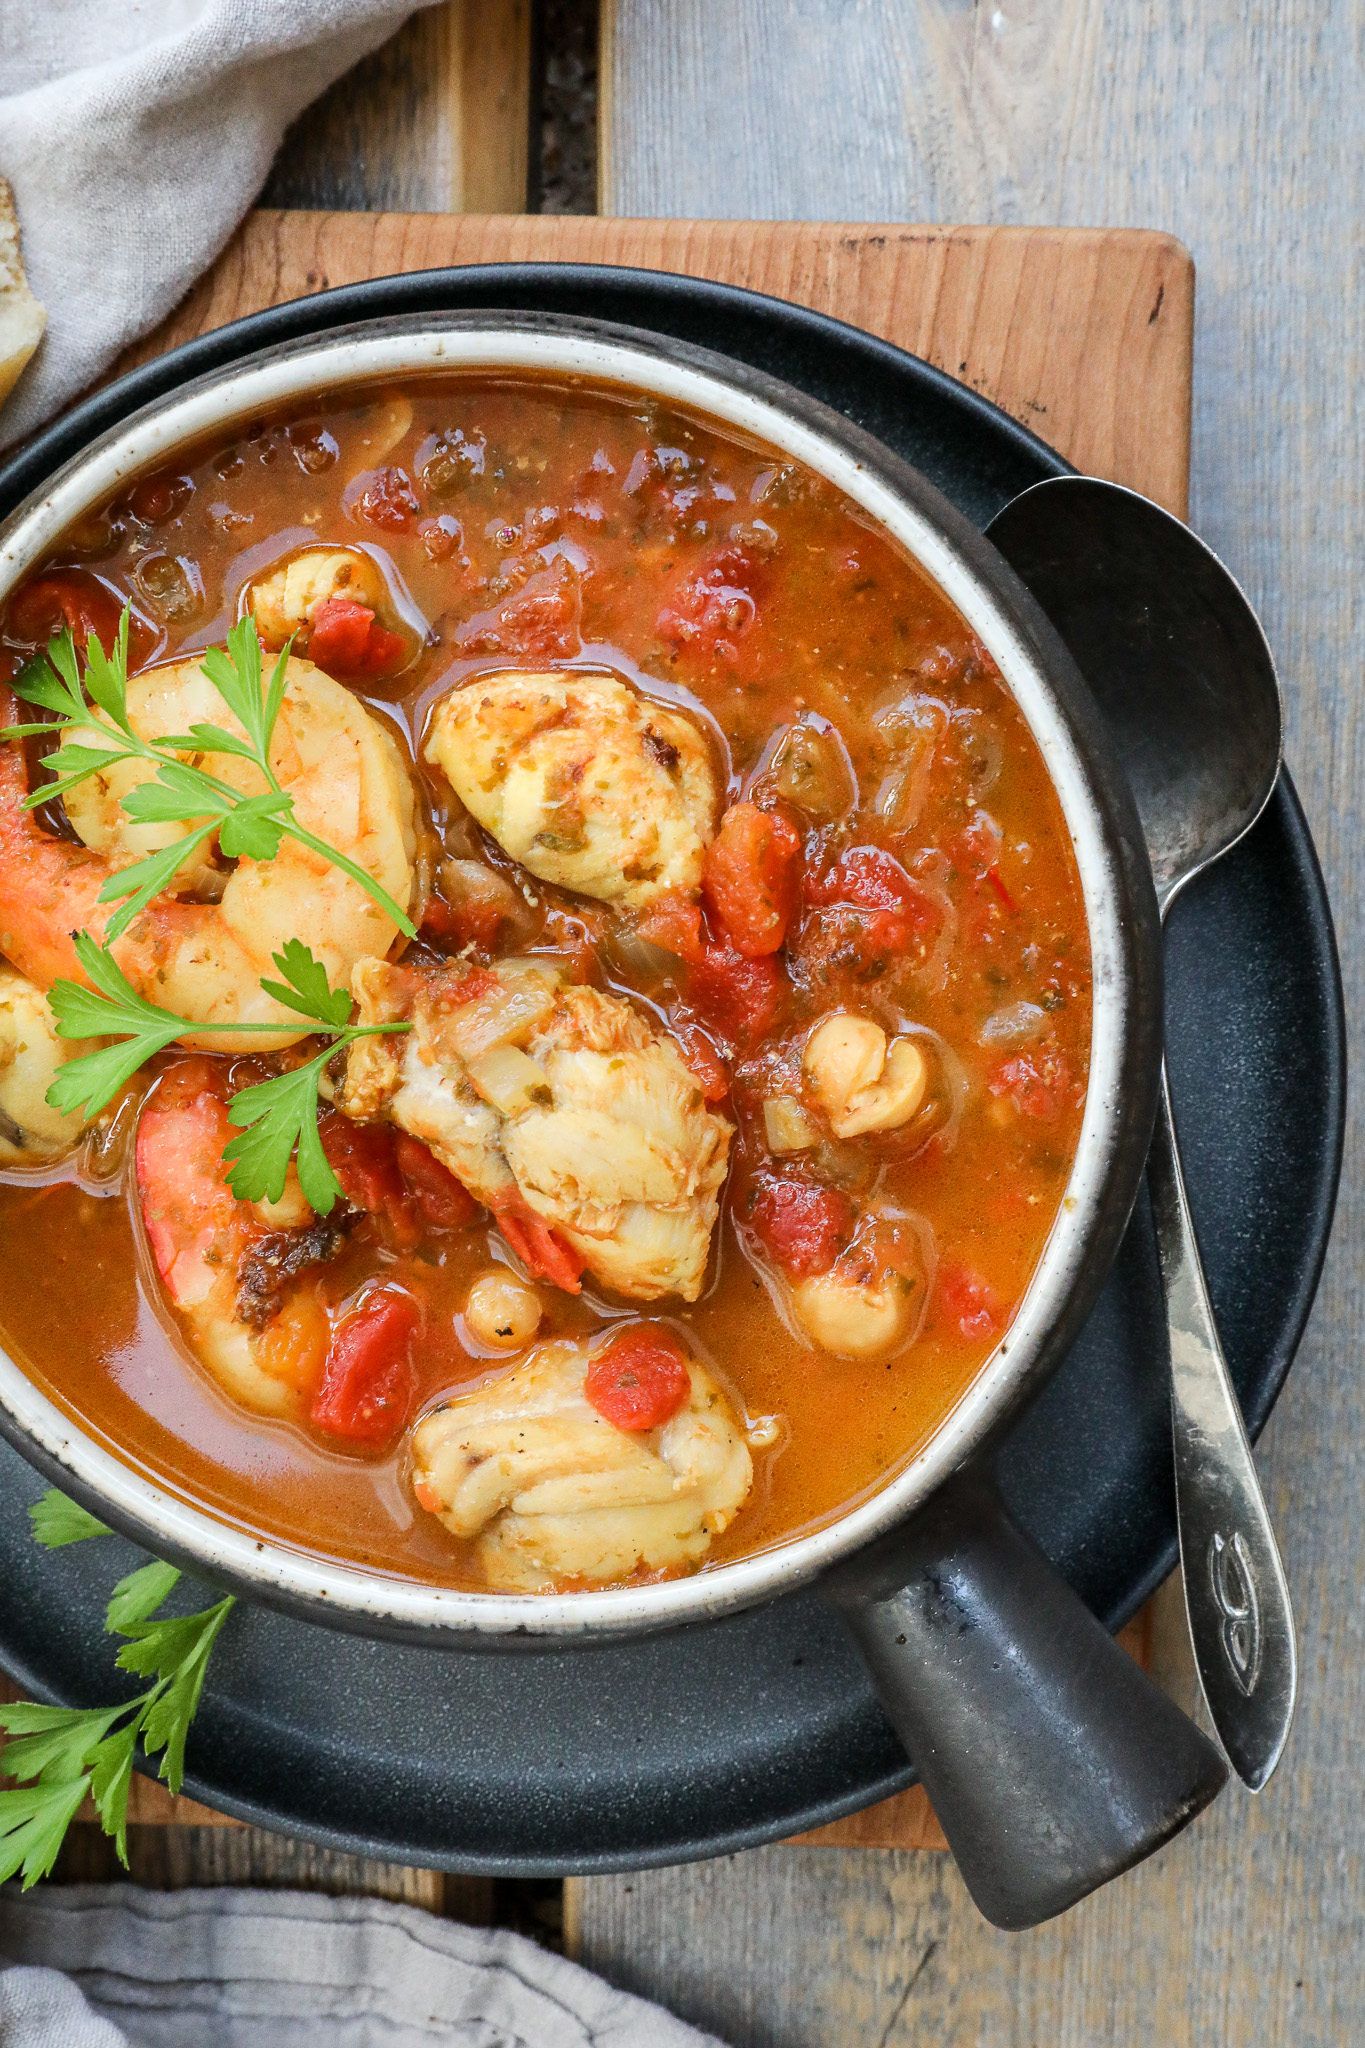 An overhead image of monkfish stew in a black bowl on a wooden counter.